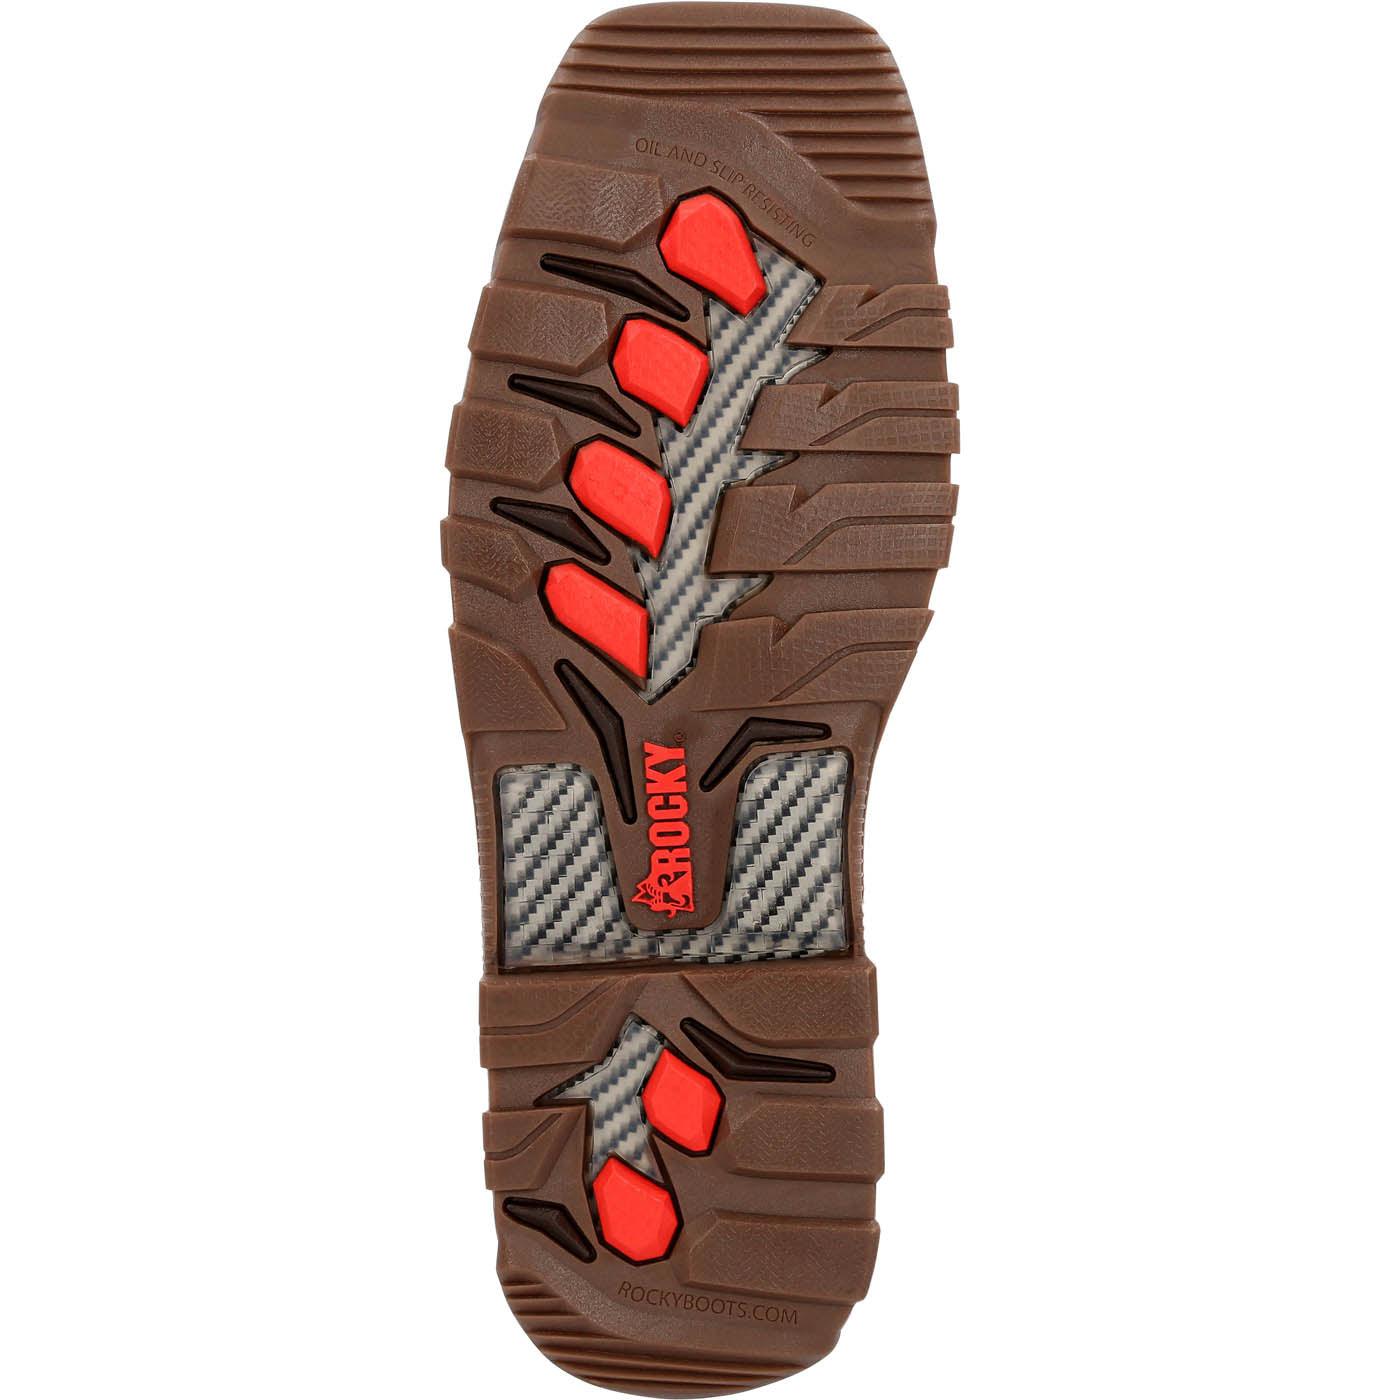 Rocky Carbon 6 Carbon Toe Waterproof Pull-On Western Boot - Flyclothing LLC